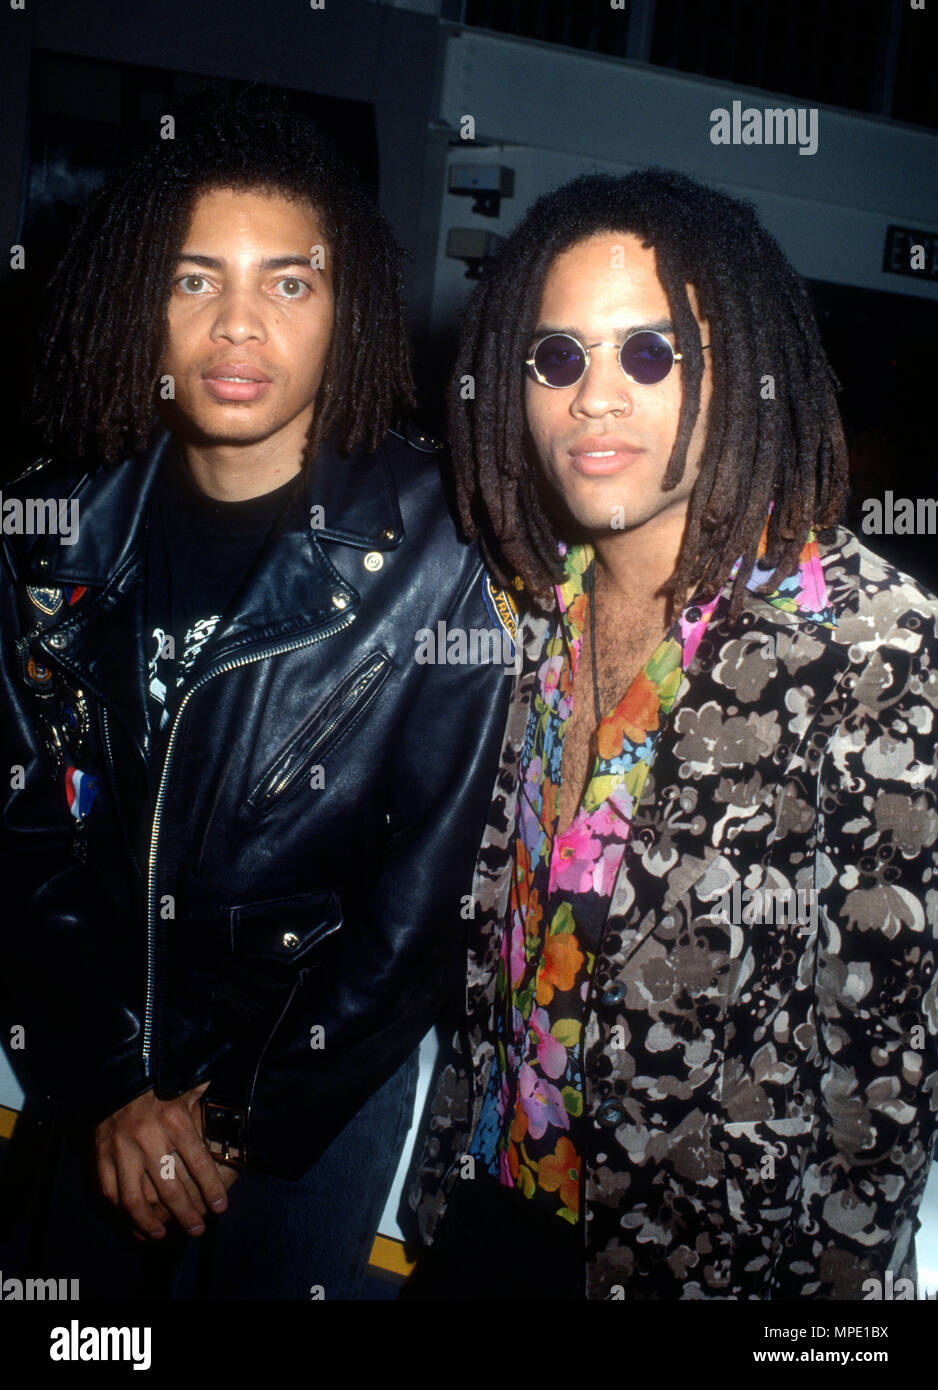 Santa Monica Ca January 31 L R Singers Terence Trent D Arby And Lenny Kravitz Attend Pollack Media Group S Eighth Annual Radio And Music Conference On January 31 1991 At The Museum Of